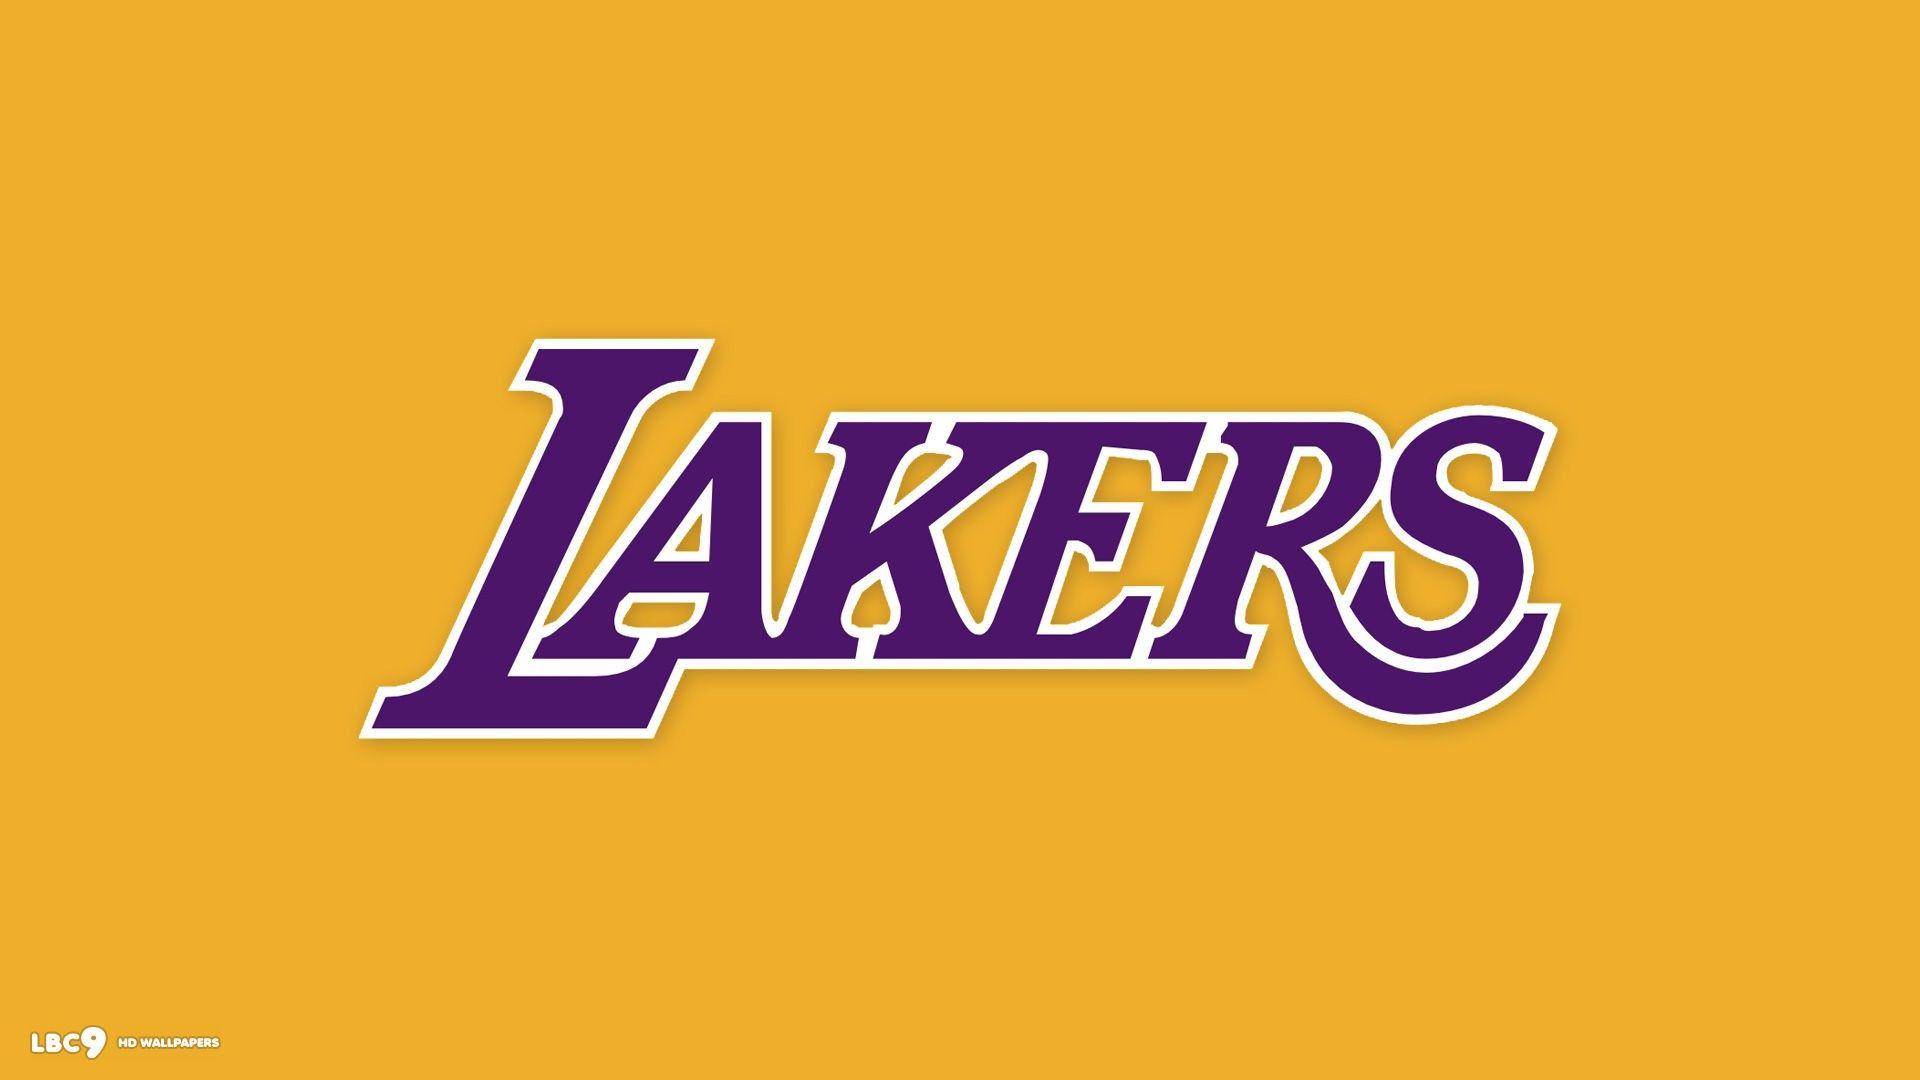 Amazing Lakers Background Picture. Beautiful image HD Picture